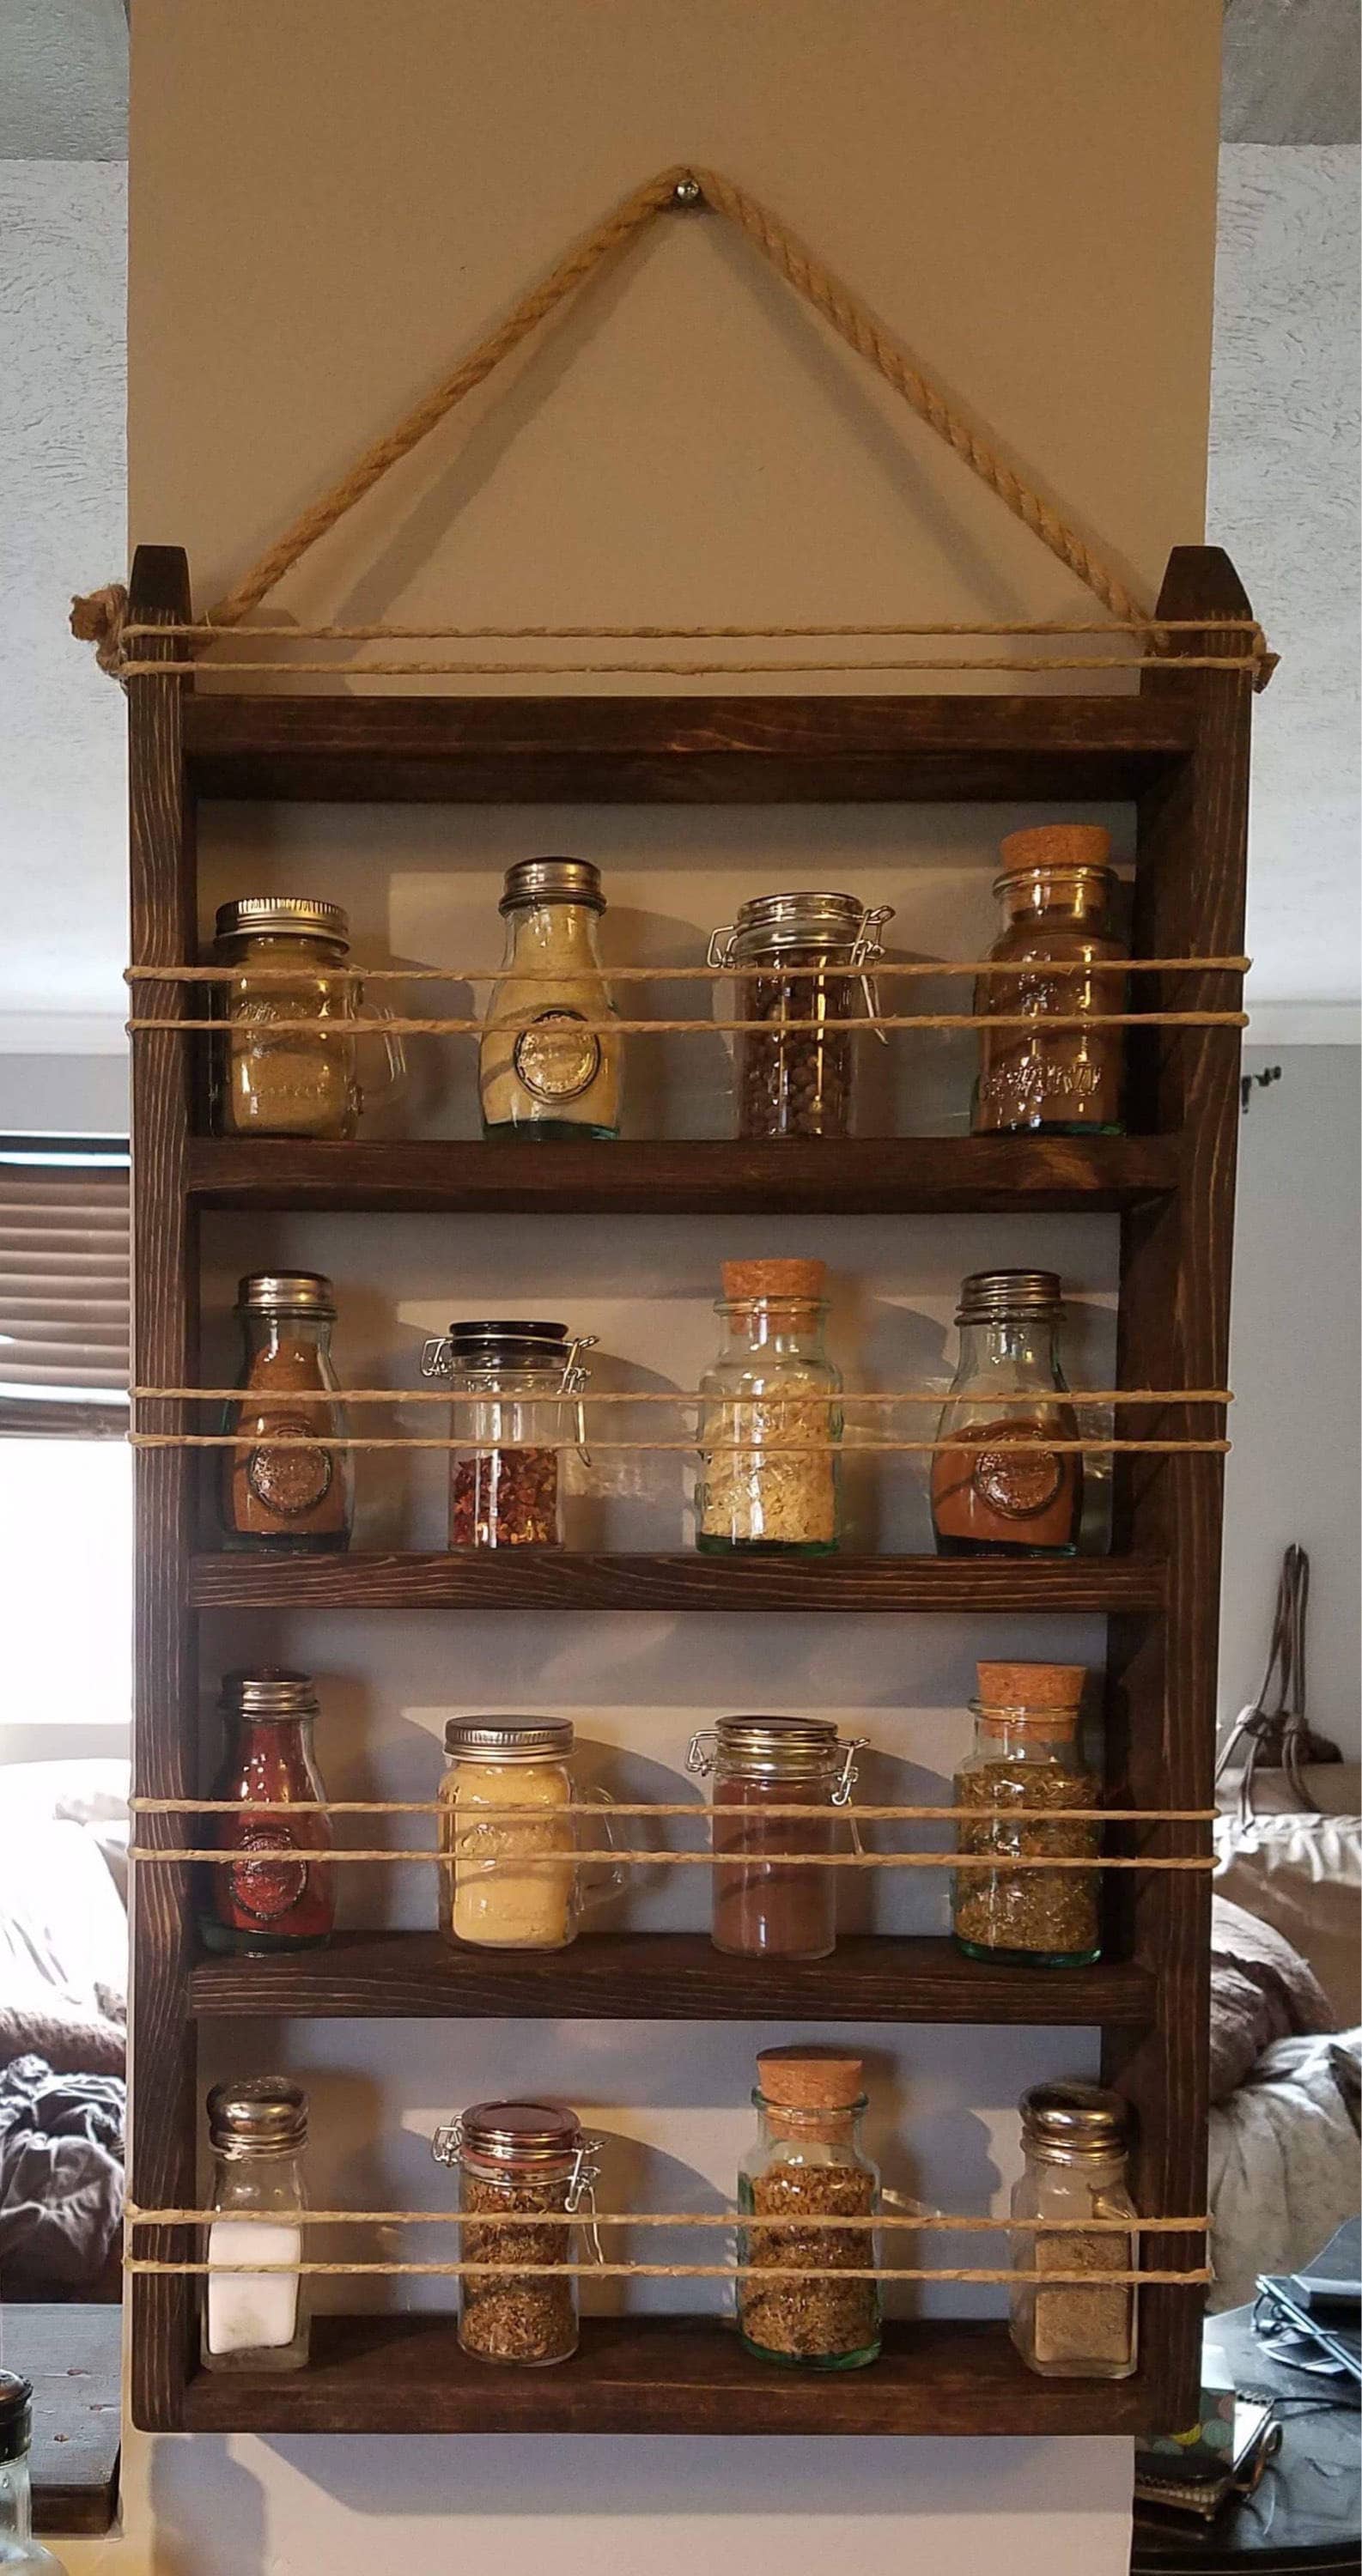 Excello Global Hanging Spice Rack - Includes 35 Glass Spice Jars and  Accessories (Brown) 